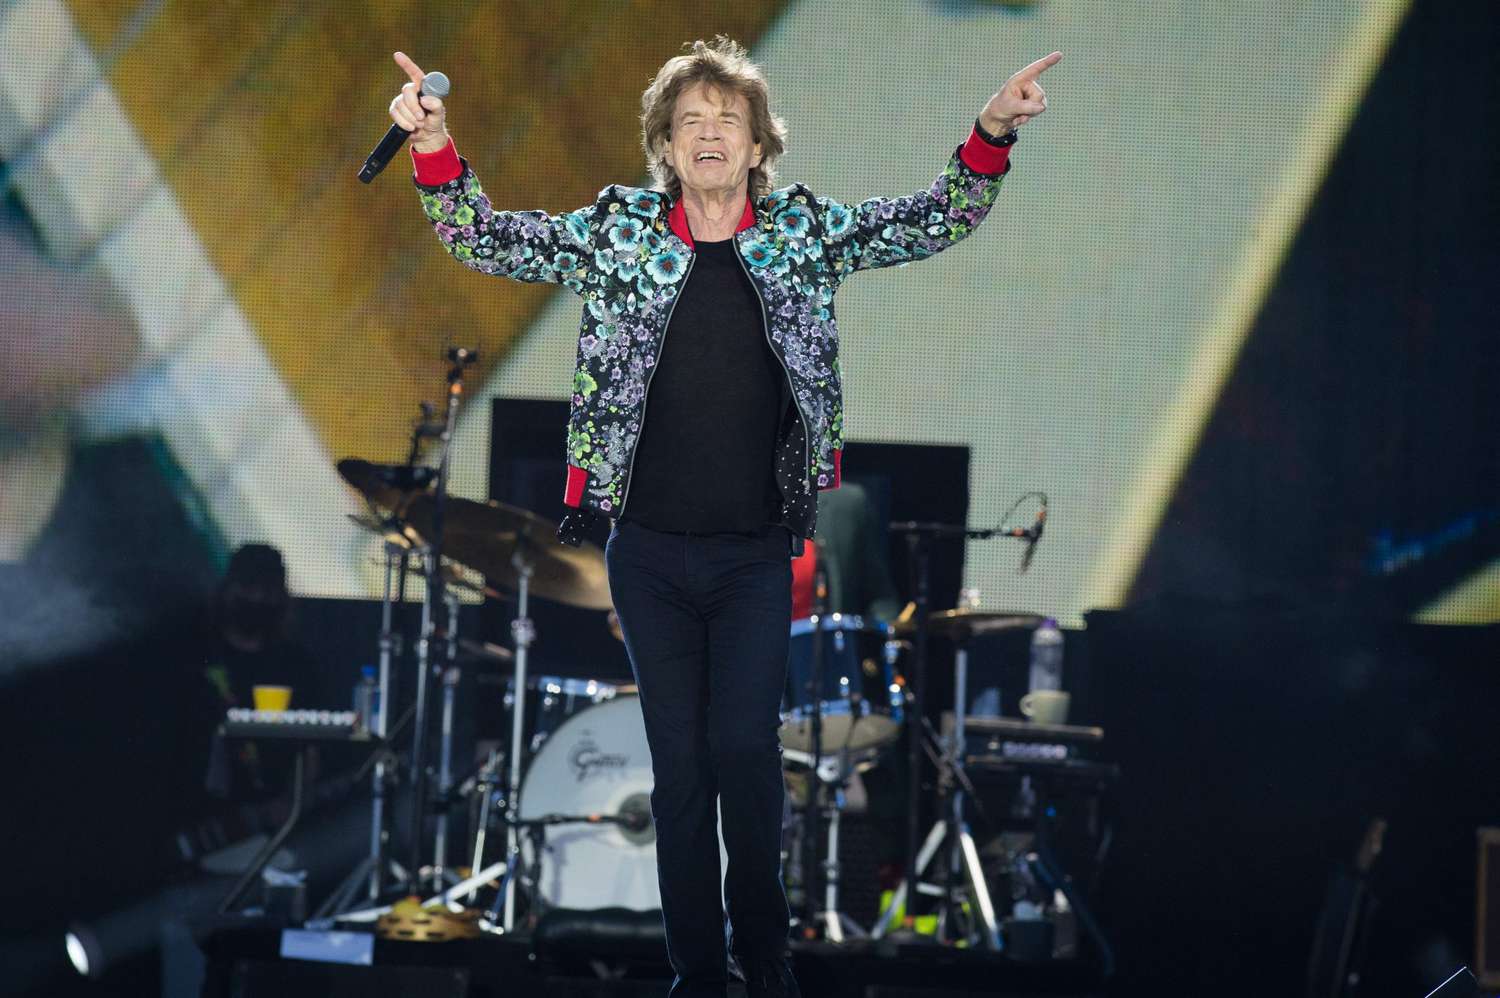 PARIS, FRANCE - JULY 23: Mick Jagger from The Rolling Stones performs at Hippodrome de Longchamp on July 23, 2022 in Paris, France. (Photo by David Wolff-Patrick/Redferns)